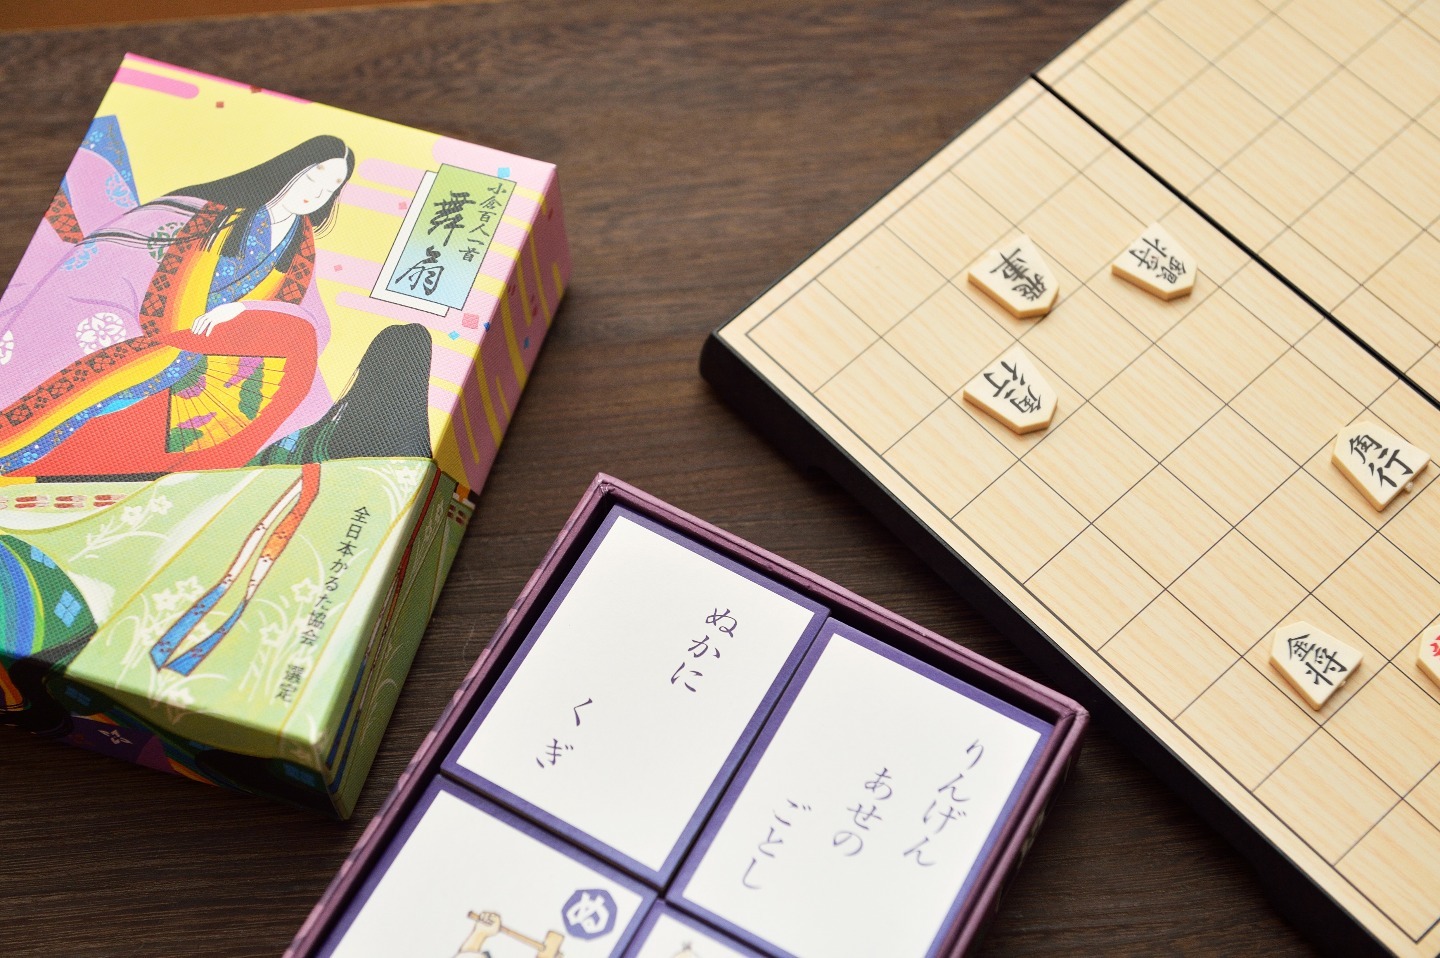 Japanese board games 